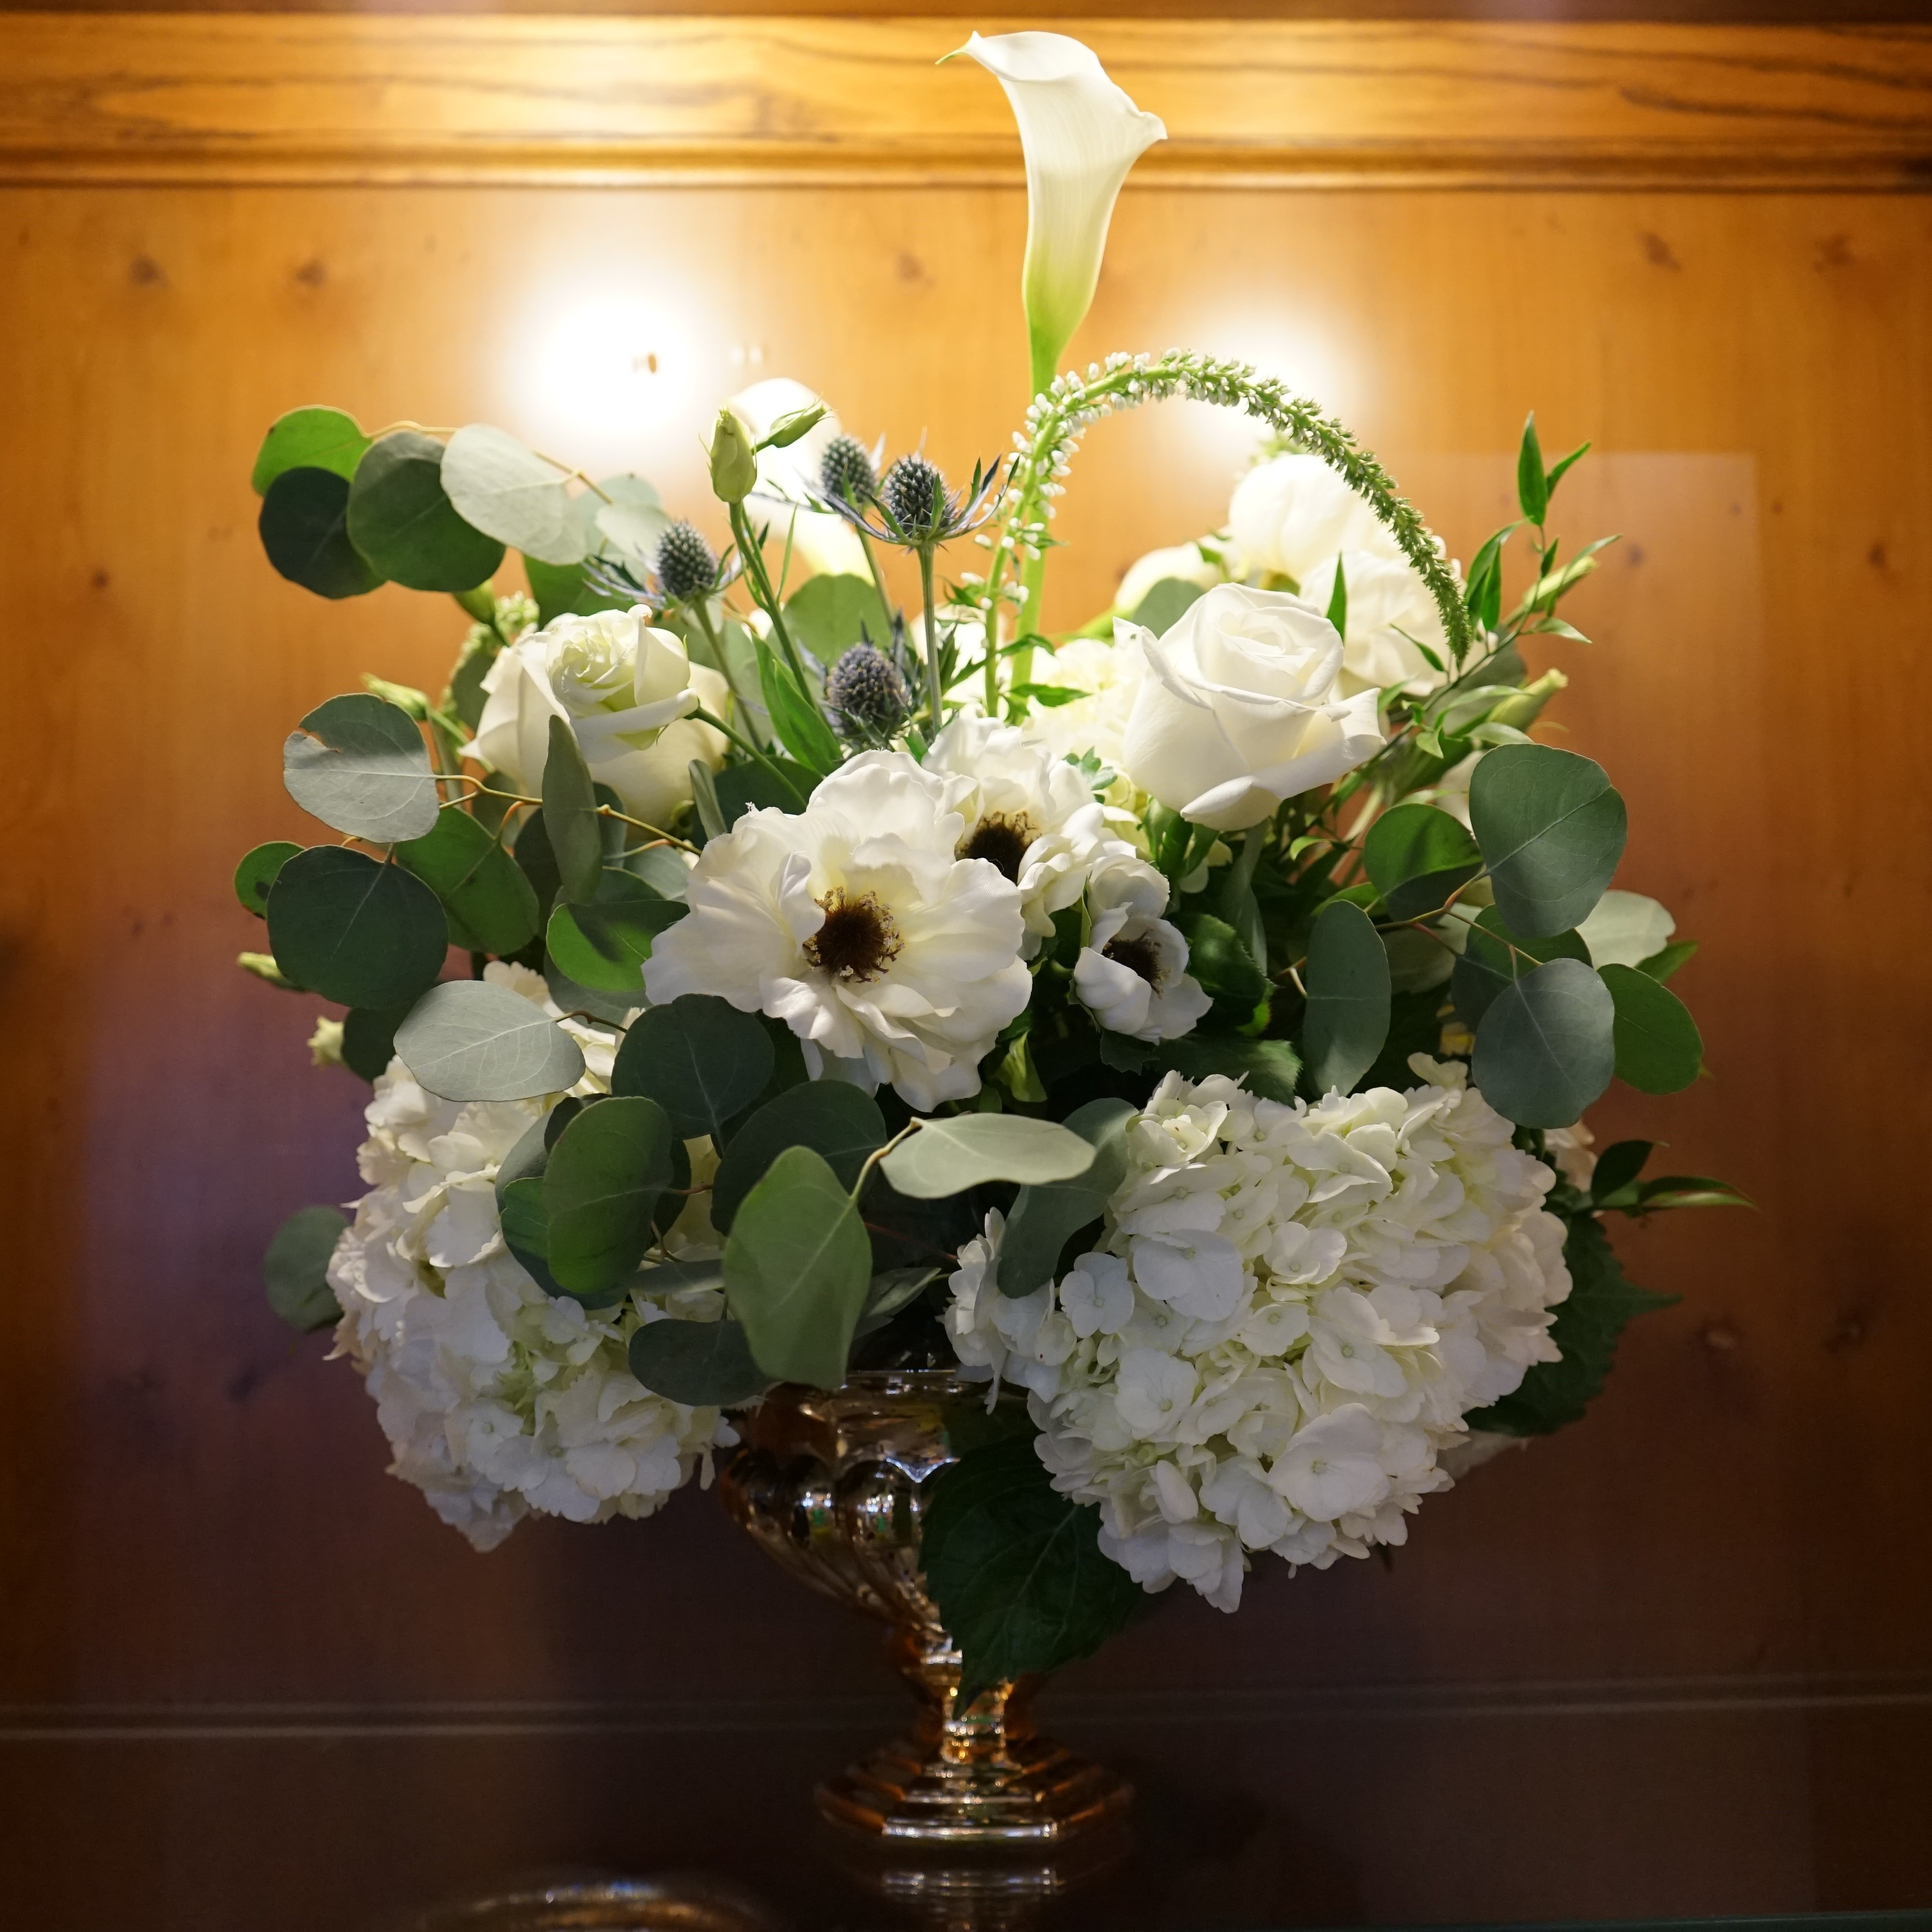 White roses mixed with other white flowers and greenery arranged by flower delivery service The Plant Gallery in New Orleans, LA